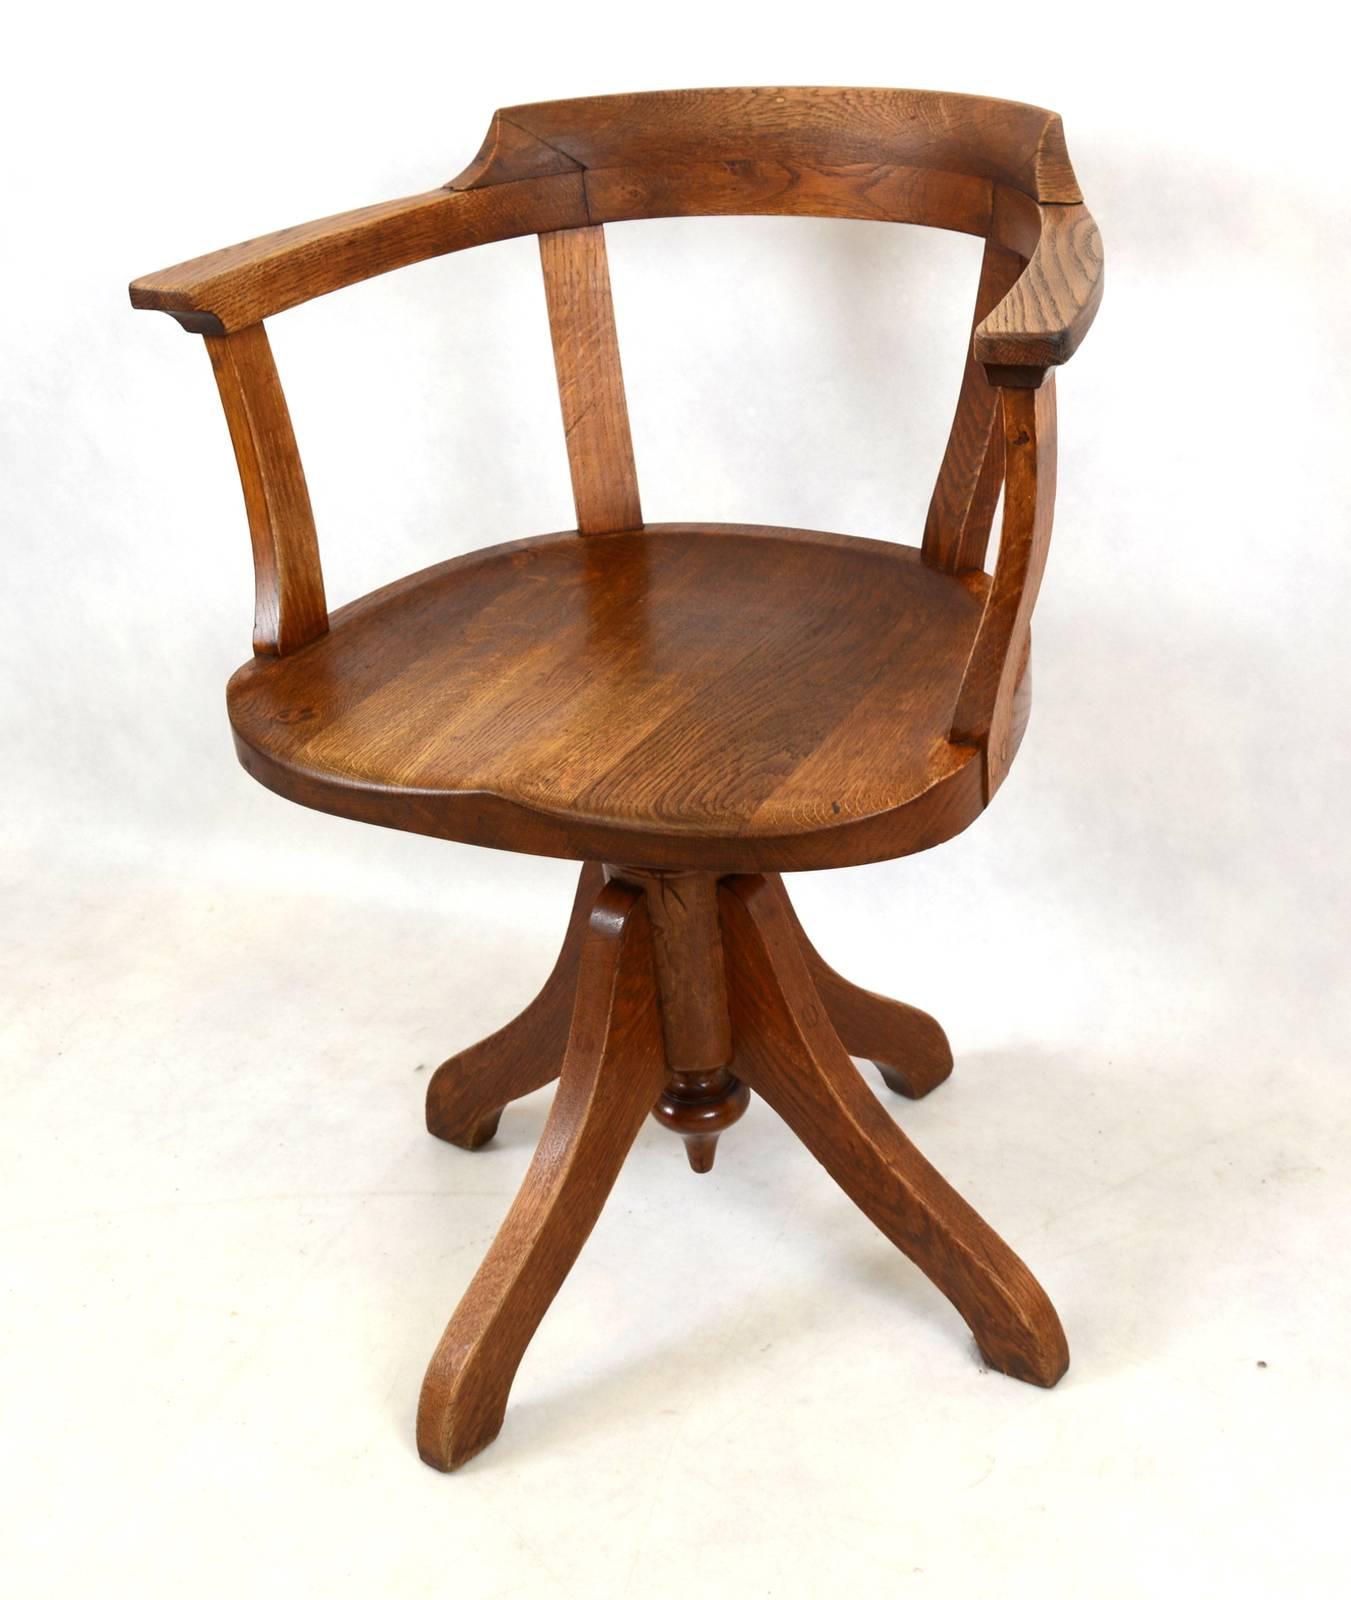 Swivel chair made in oak from Swedish post office.